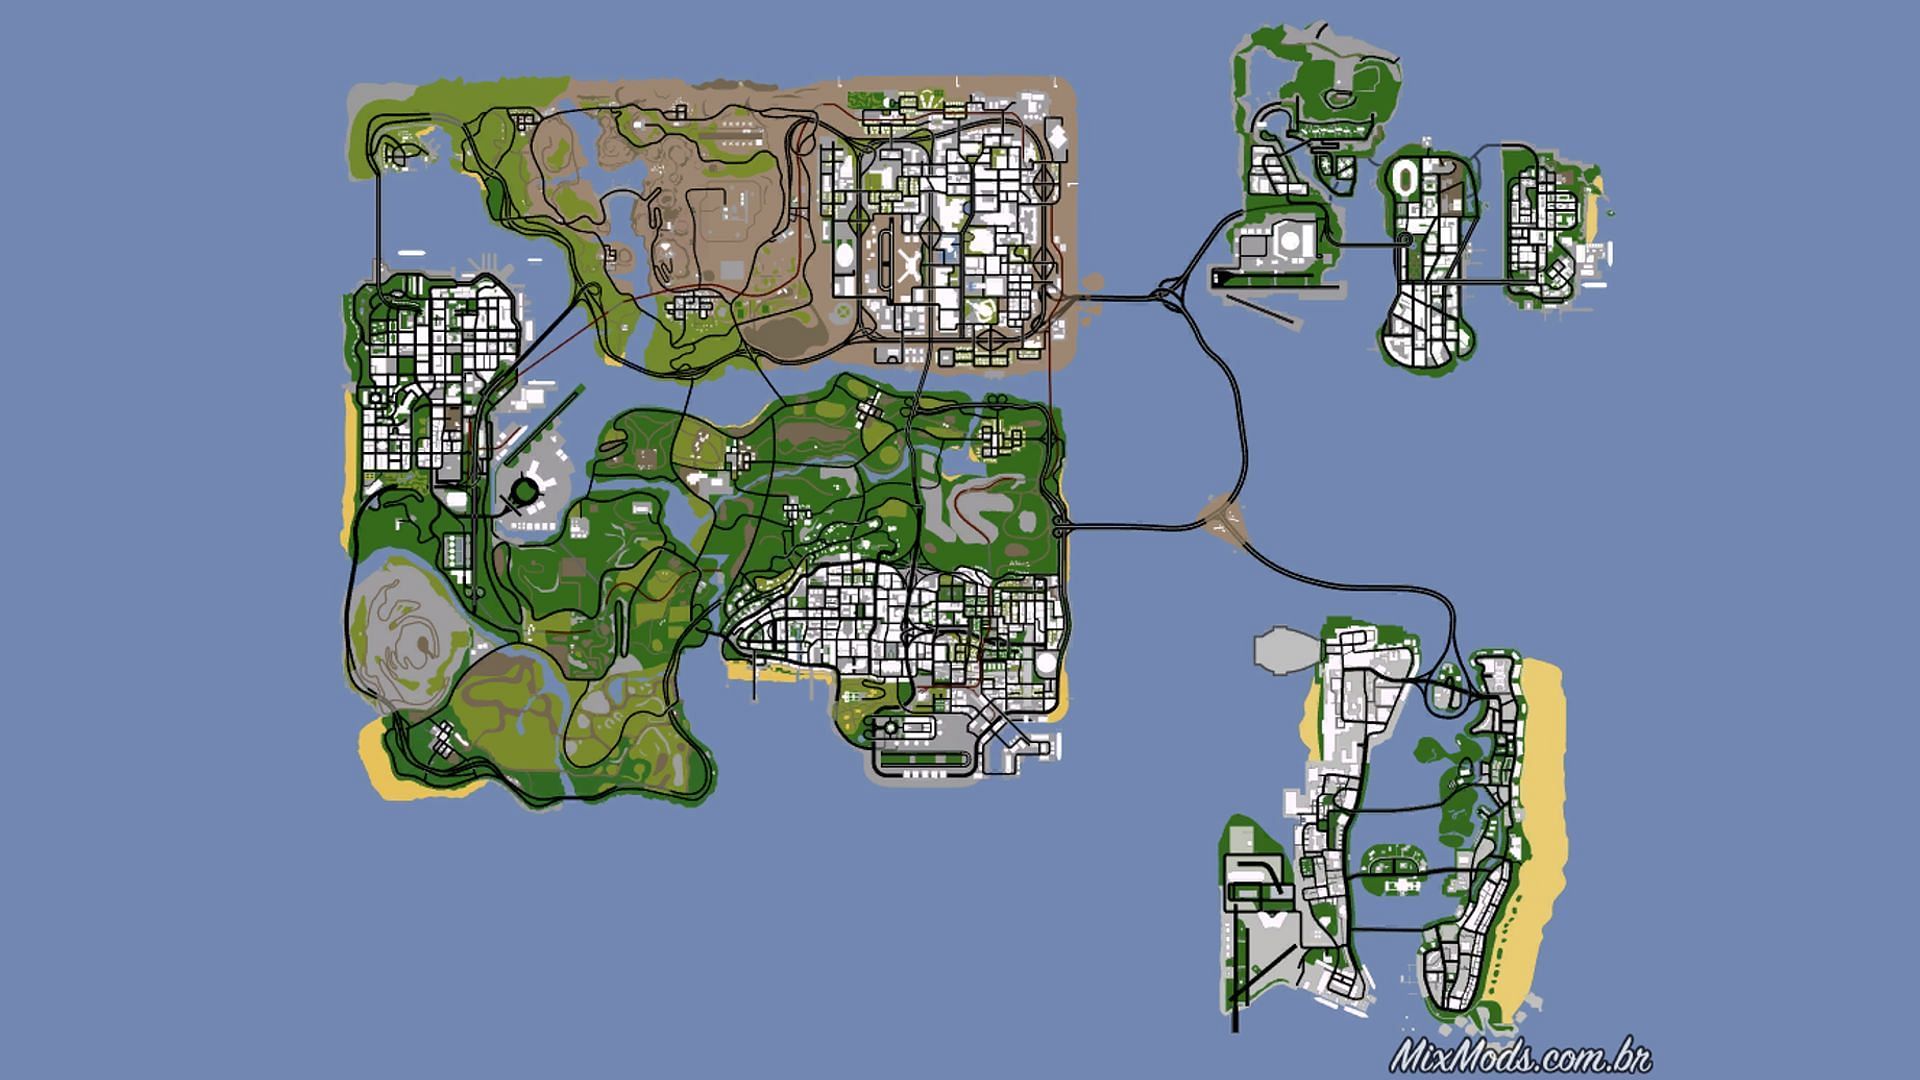 The map of this mod